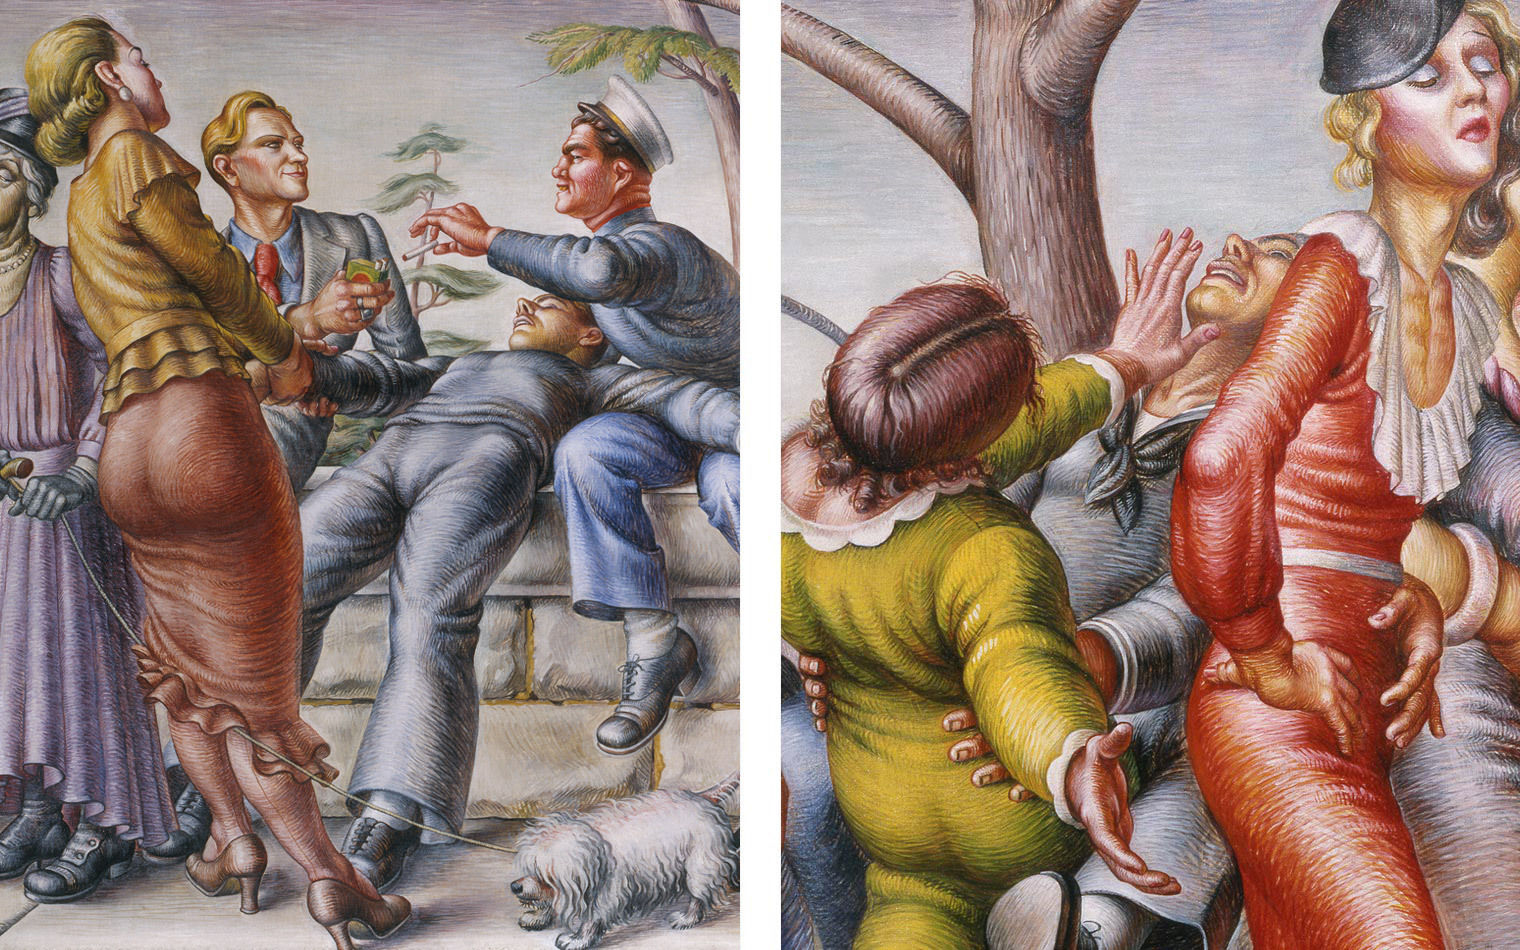 Two details of Paul Cadmus's The Fleet's In depicting a man in a suit and a woman rejecting a man's advances